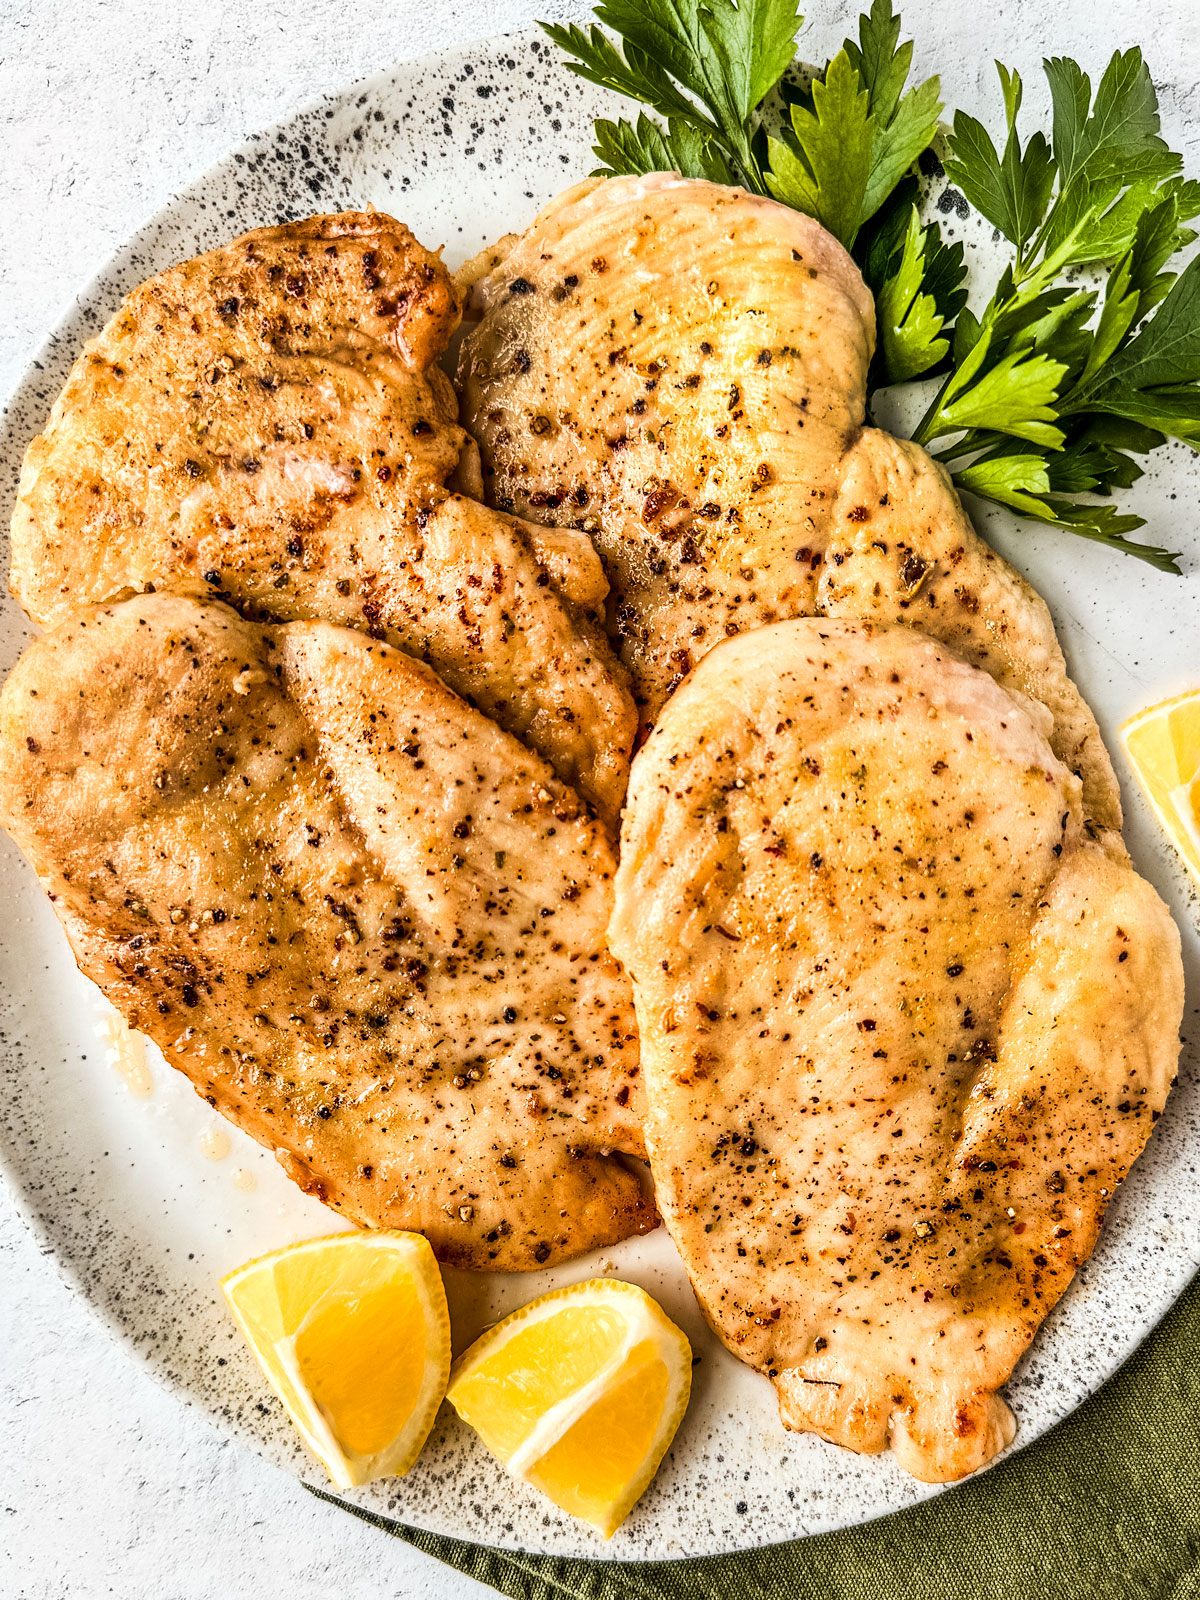 Seasoned chicken cutlets on a plate with lemon wedges and fresh parsley.